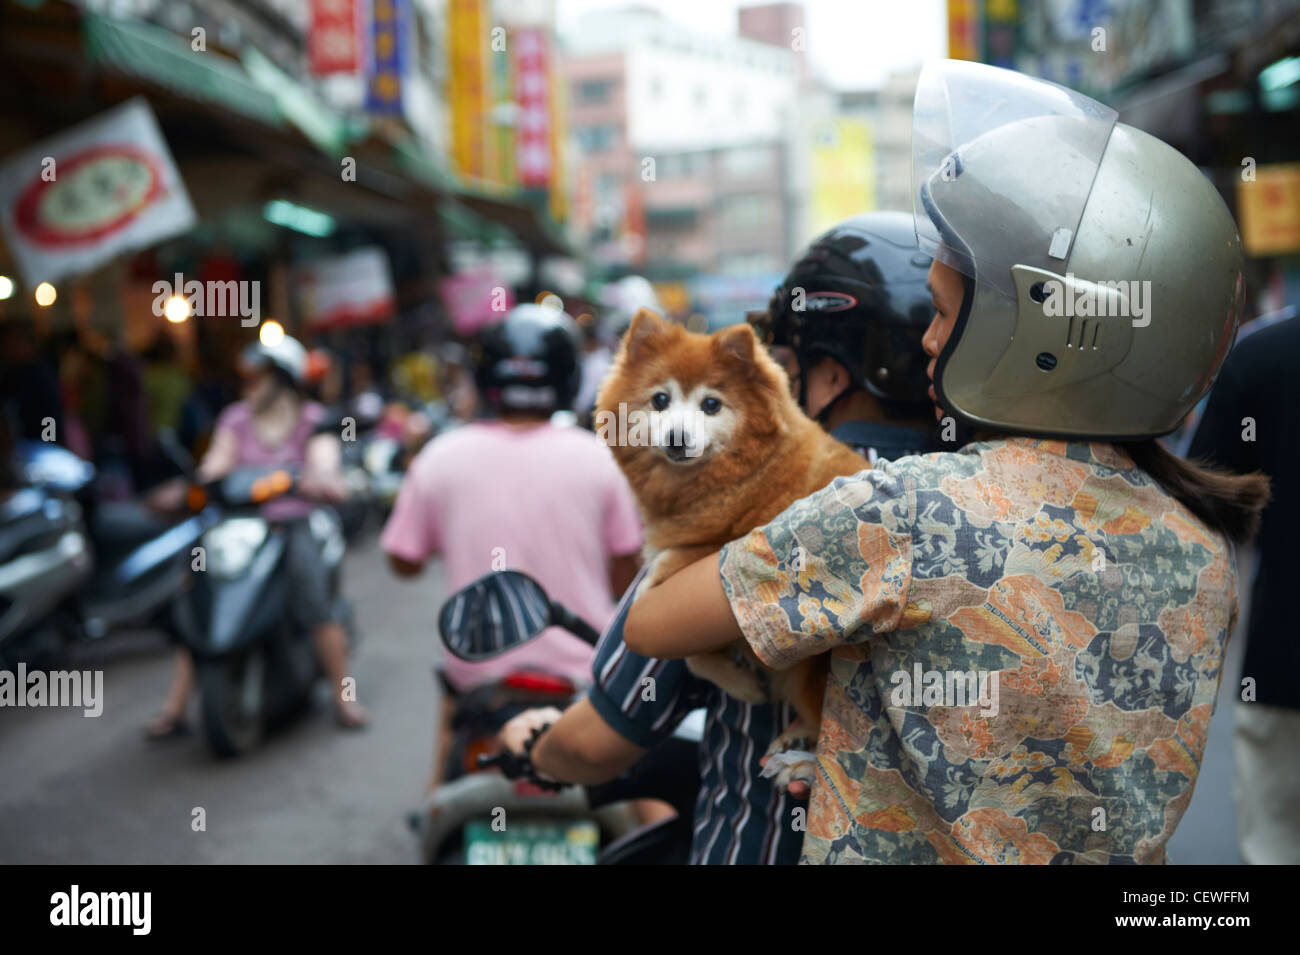 A woman riding on the back of a scooter with her dog in hand. Not released. Stock Photo